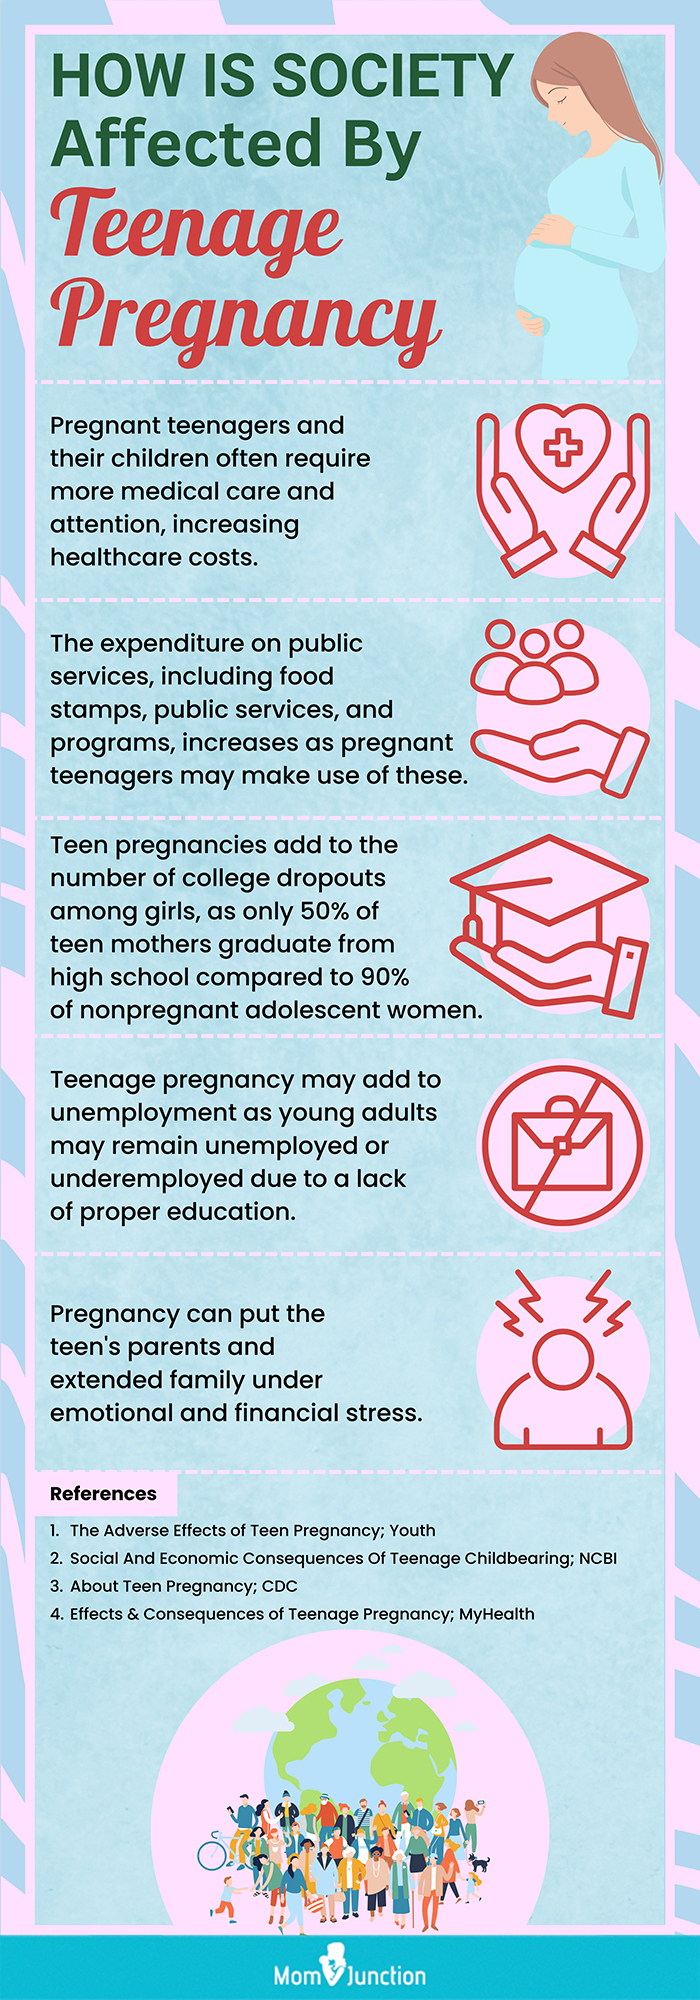 11 Negative Effects Of Teenage Pregnancy On Society